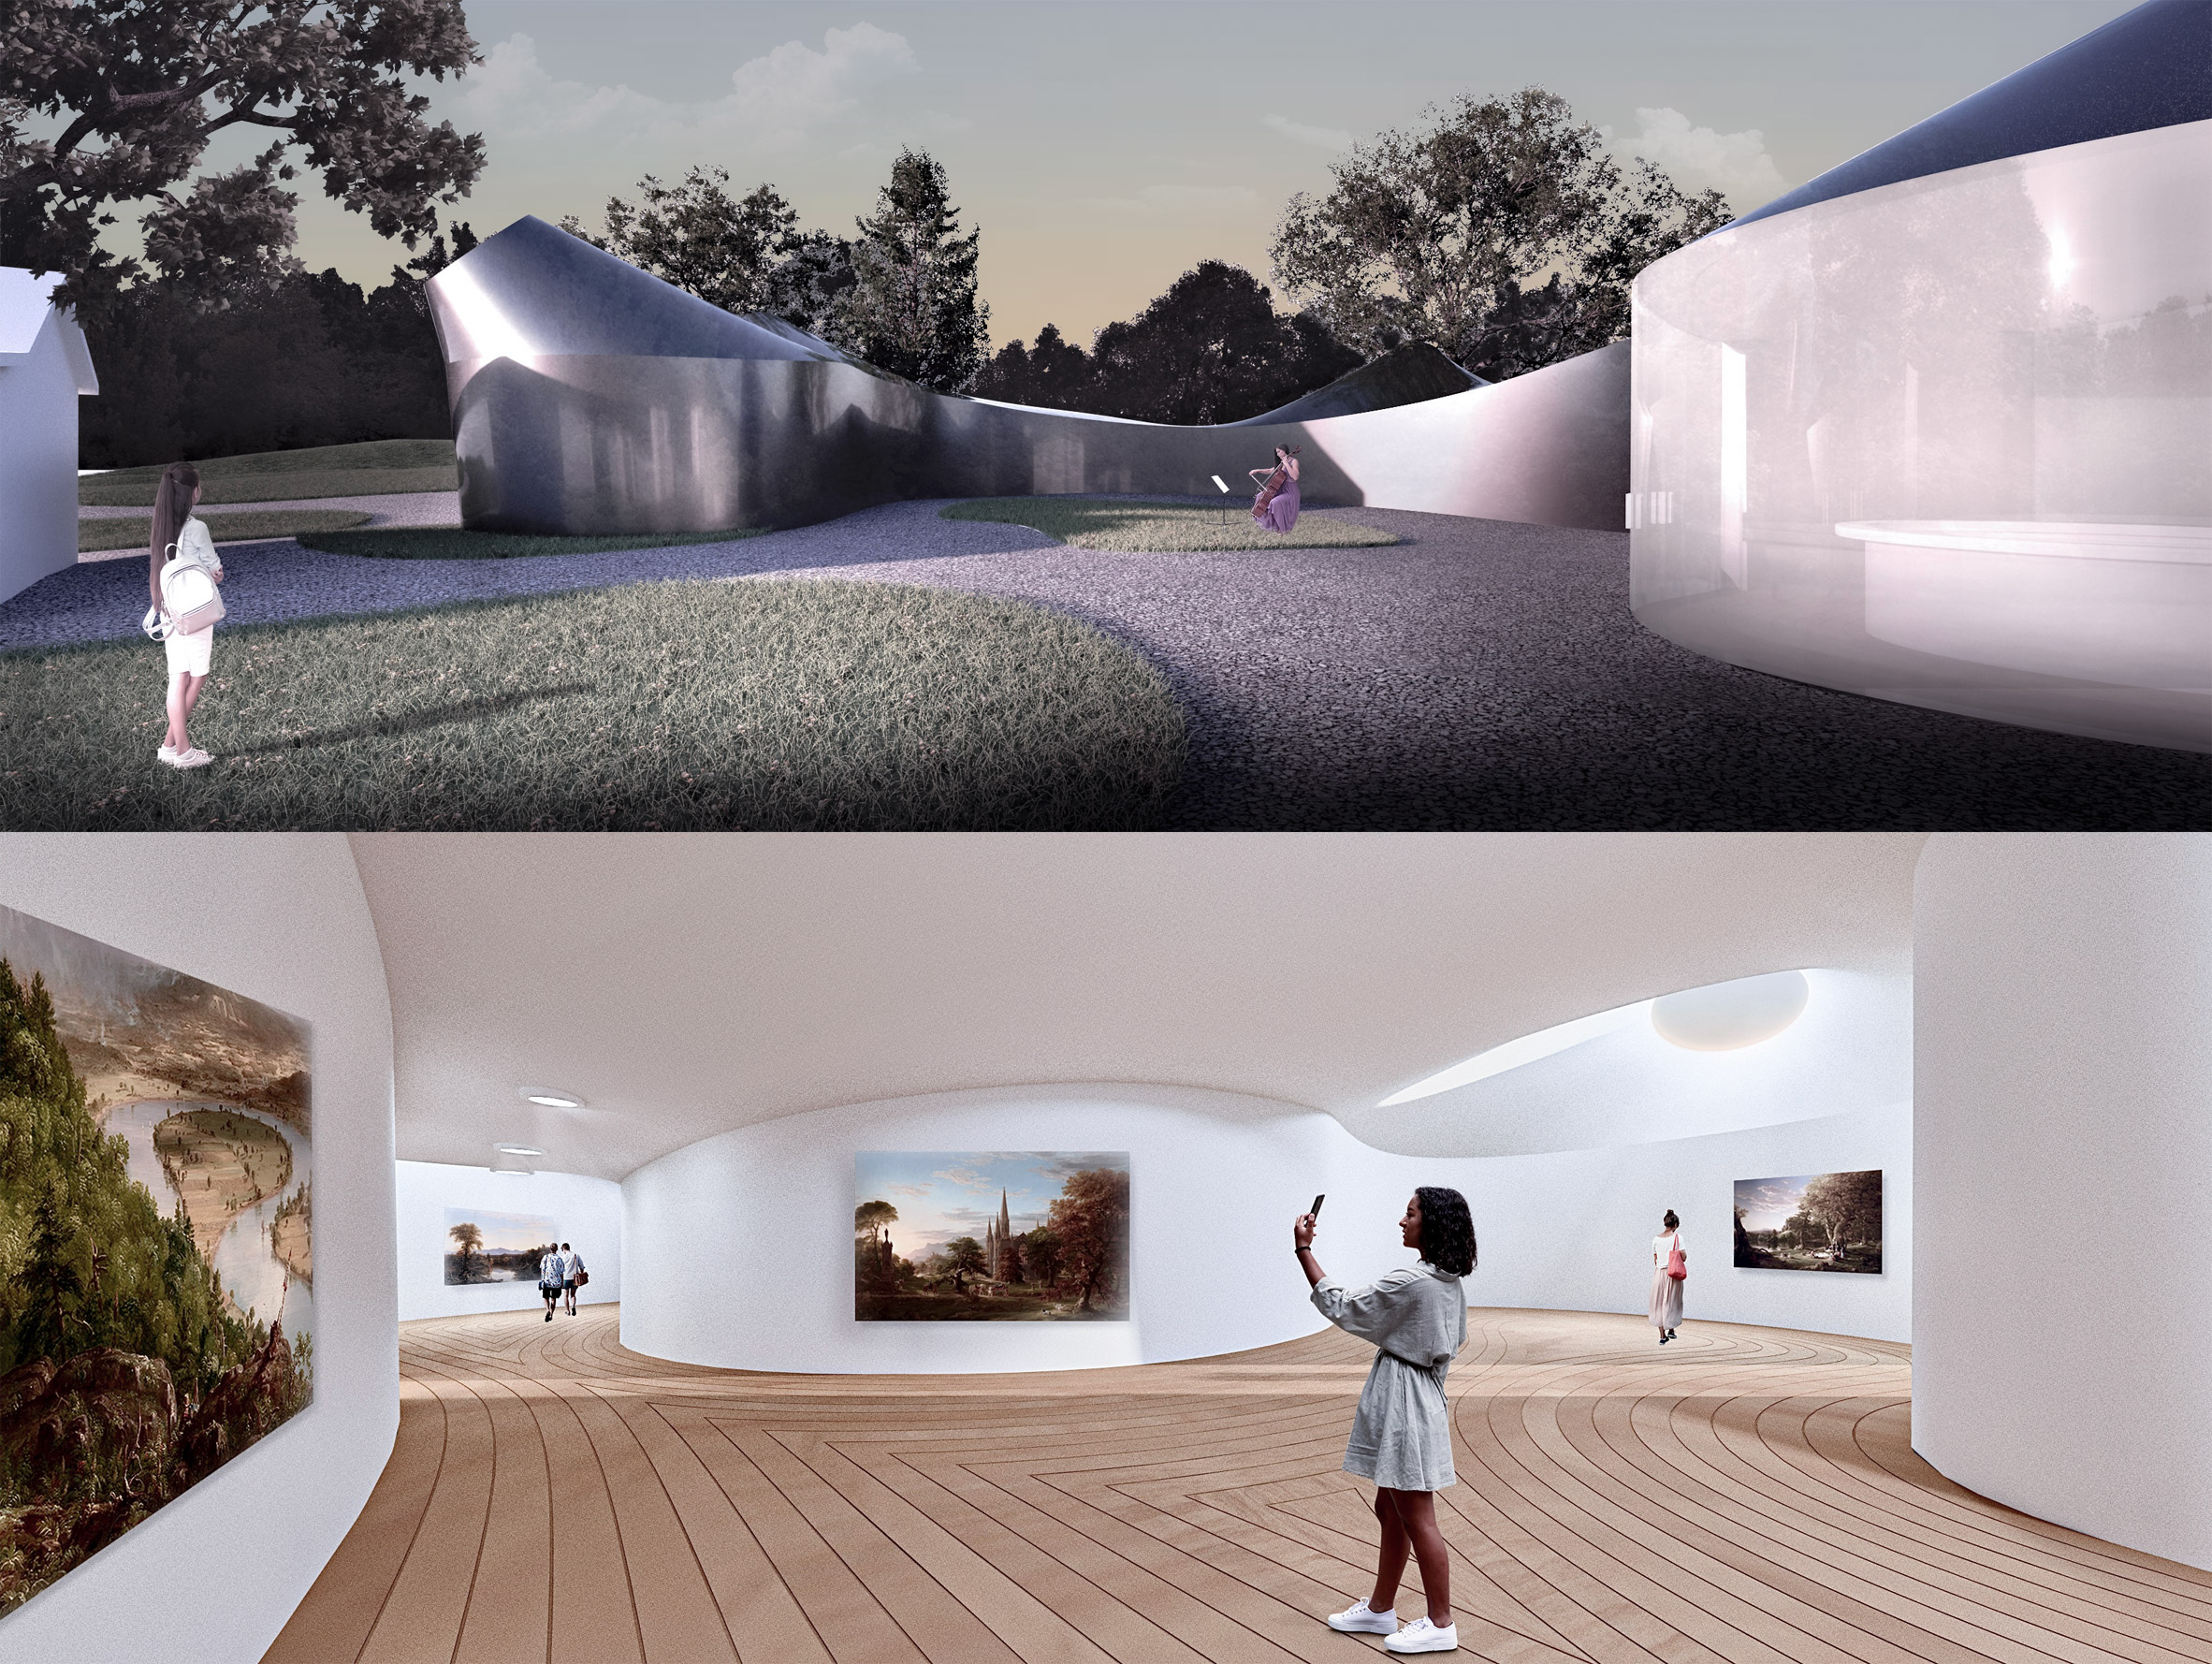 Visualisations of the exterior and interior of an art gallery